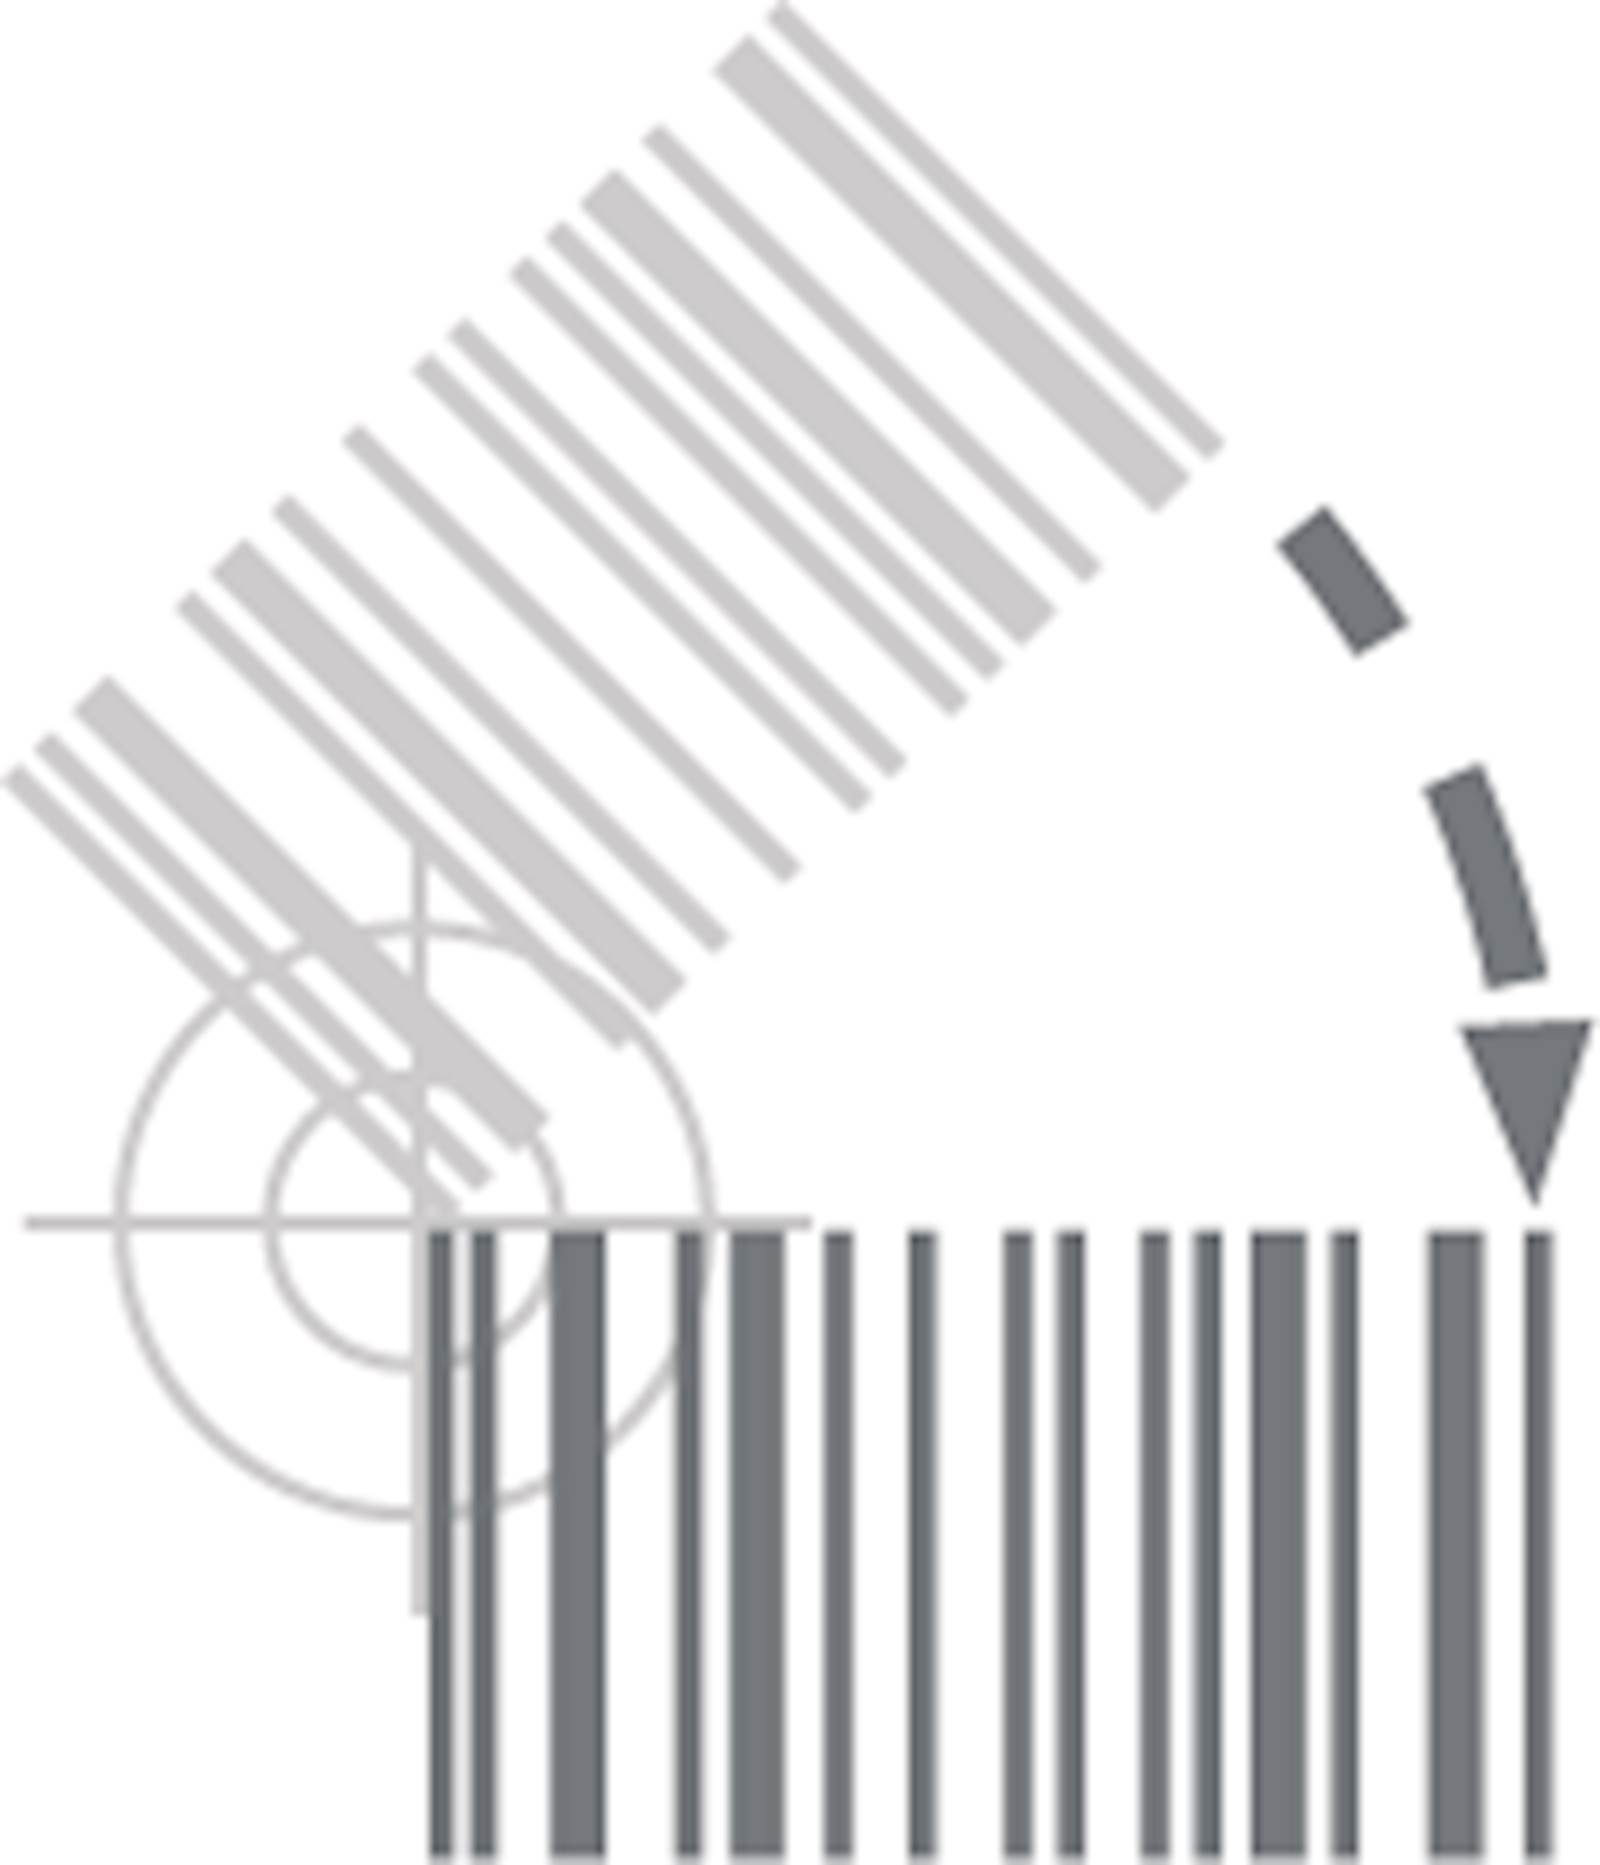 Drivve Image Barcode orientations Graphic